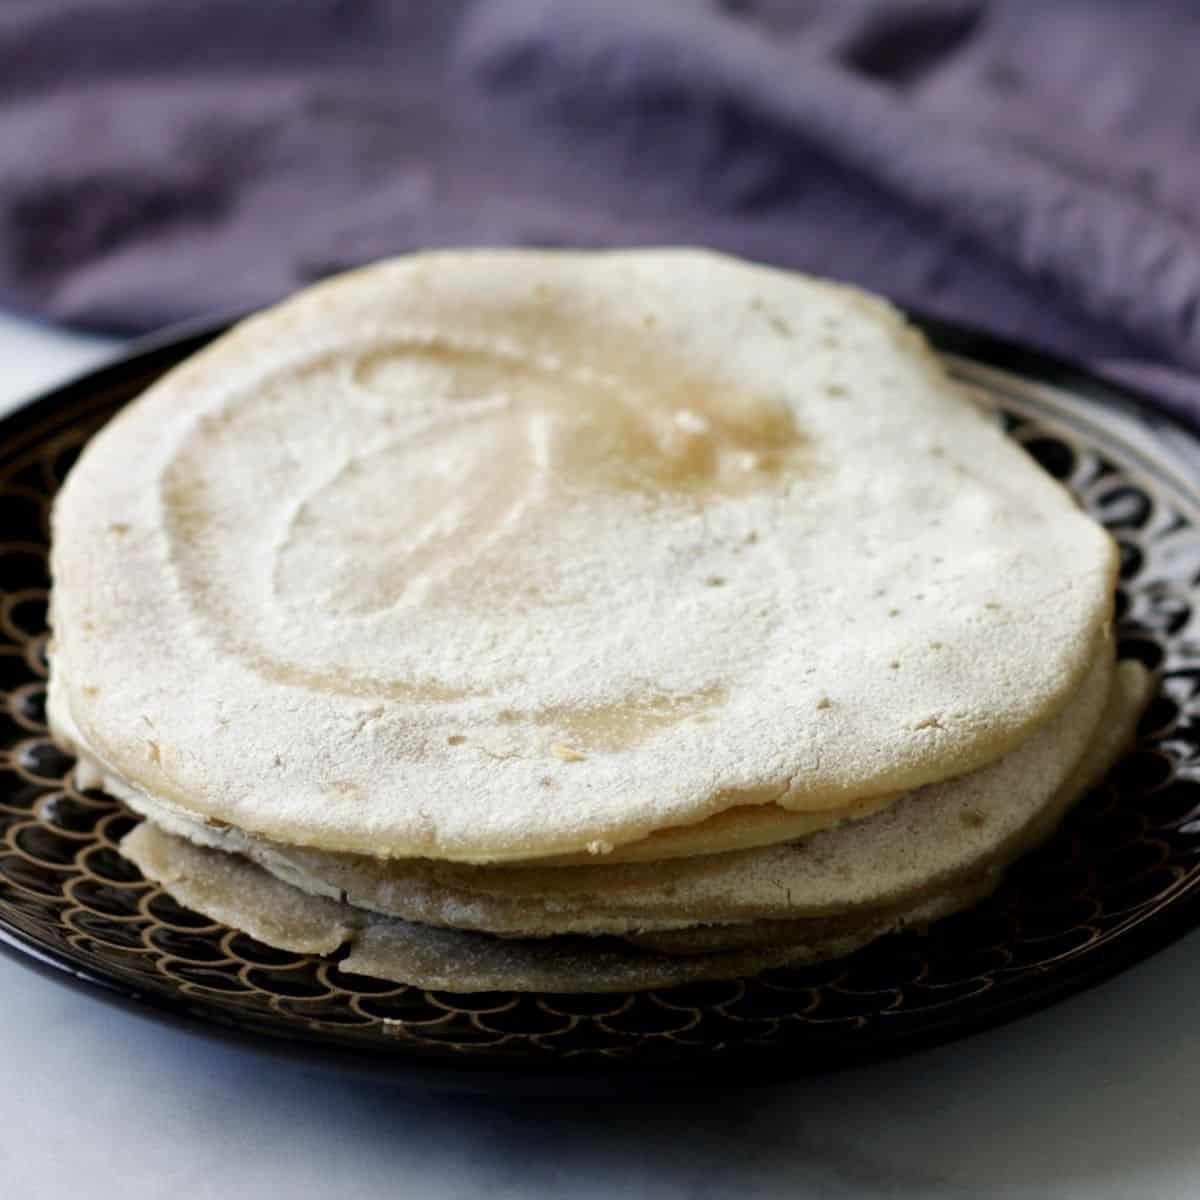 stack of flour tortillas on black plate with lavender napkin in background